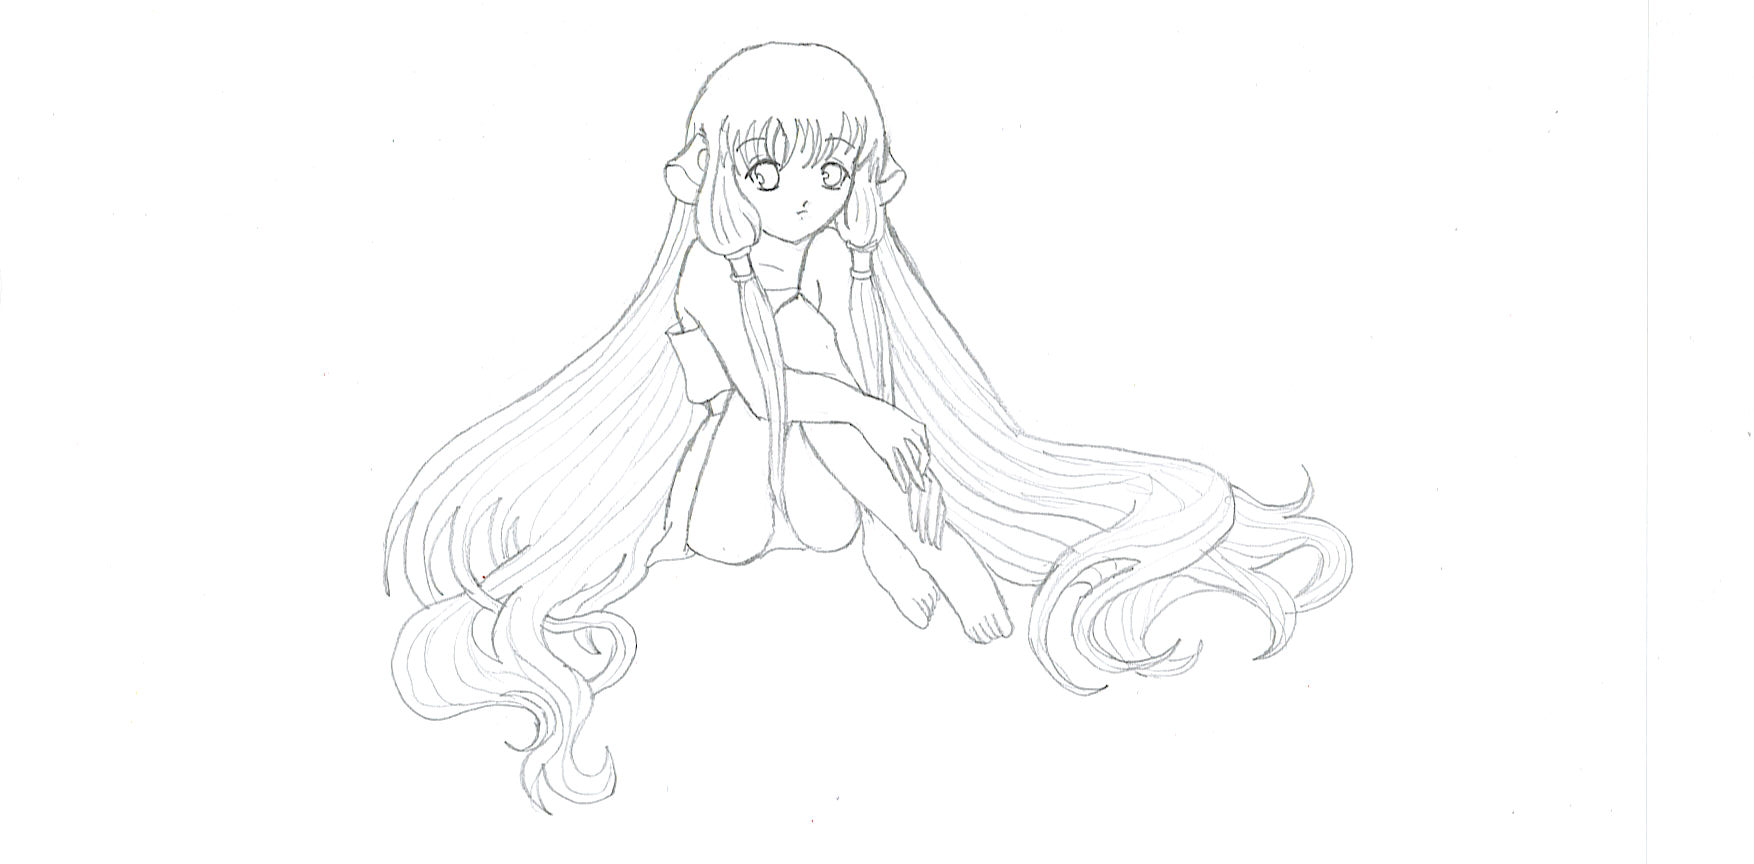 Chii from "Chobits" by AnimeMangaLover